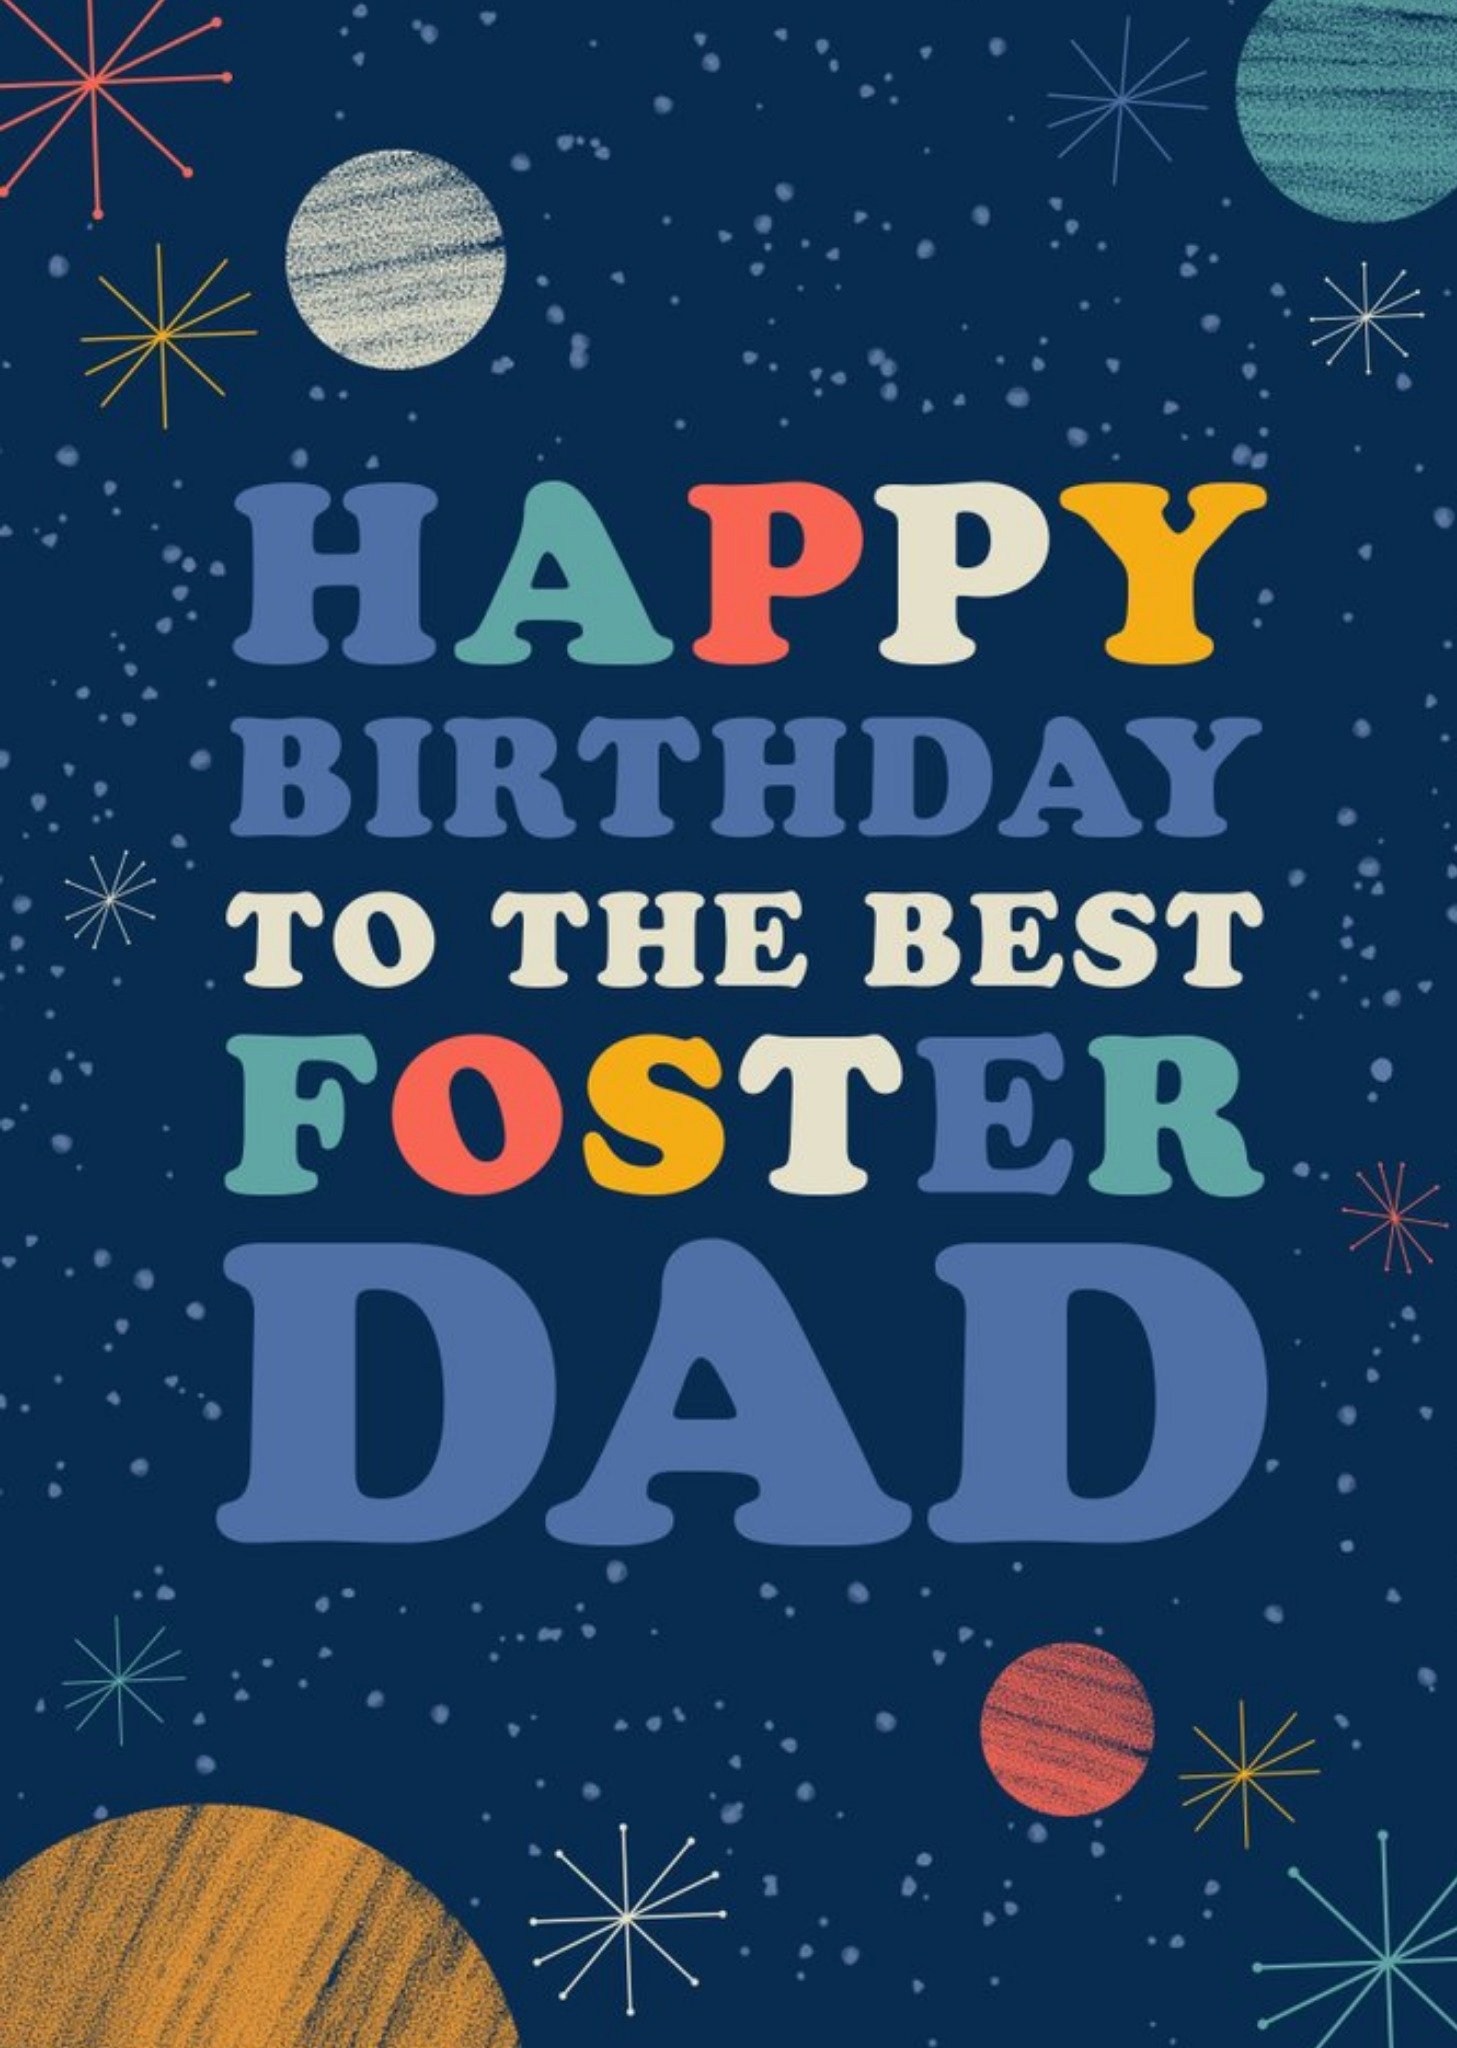 Moonpig Typographic Space Illustration Happy Birthday To The Best Foster Dad Card Ecard